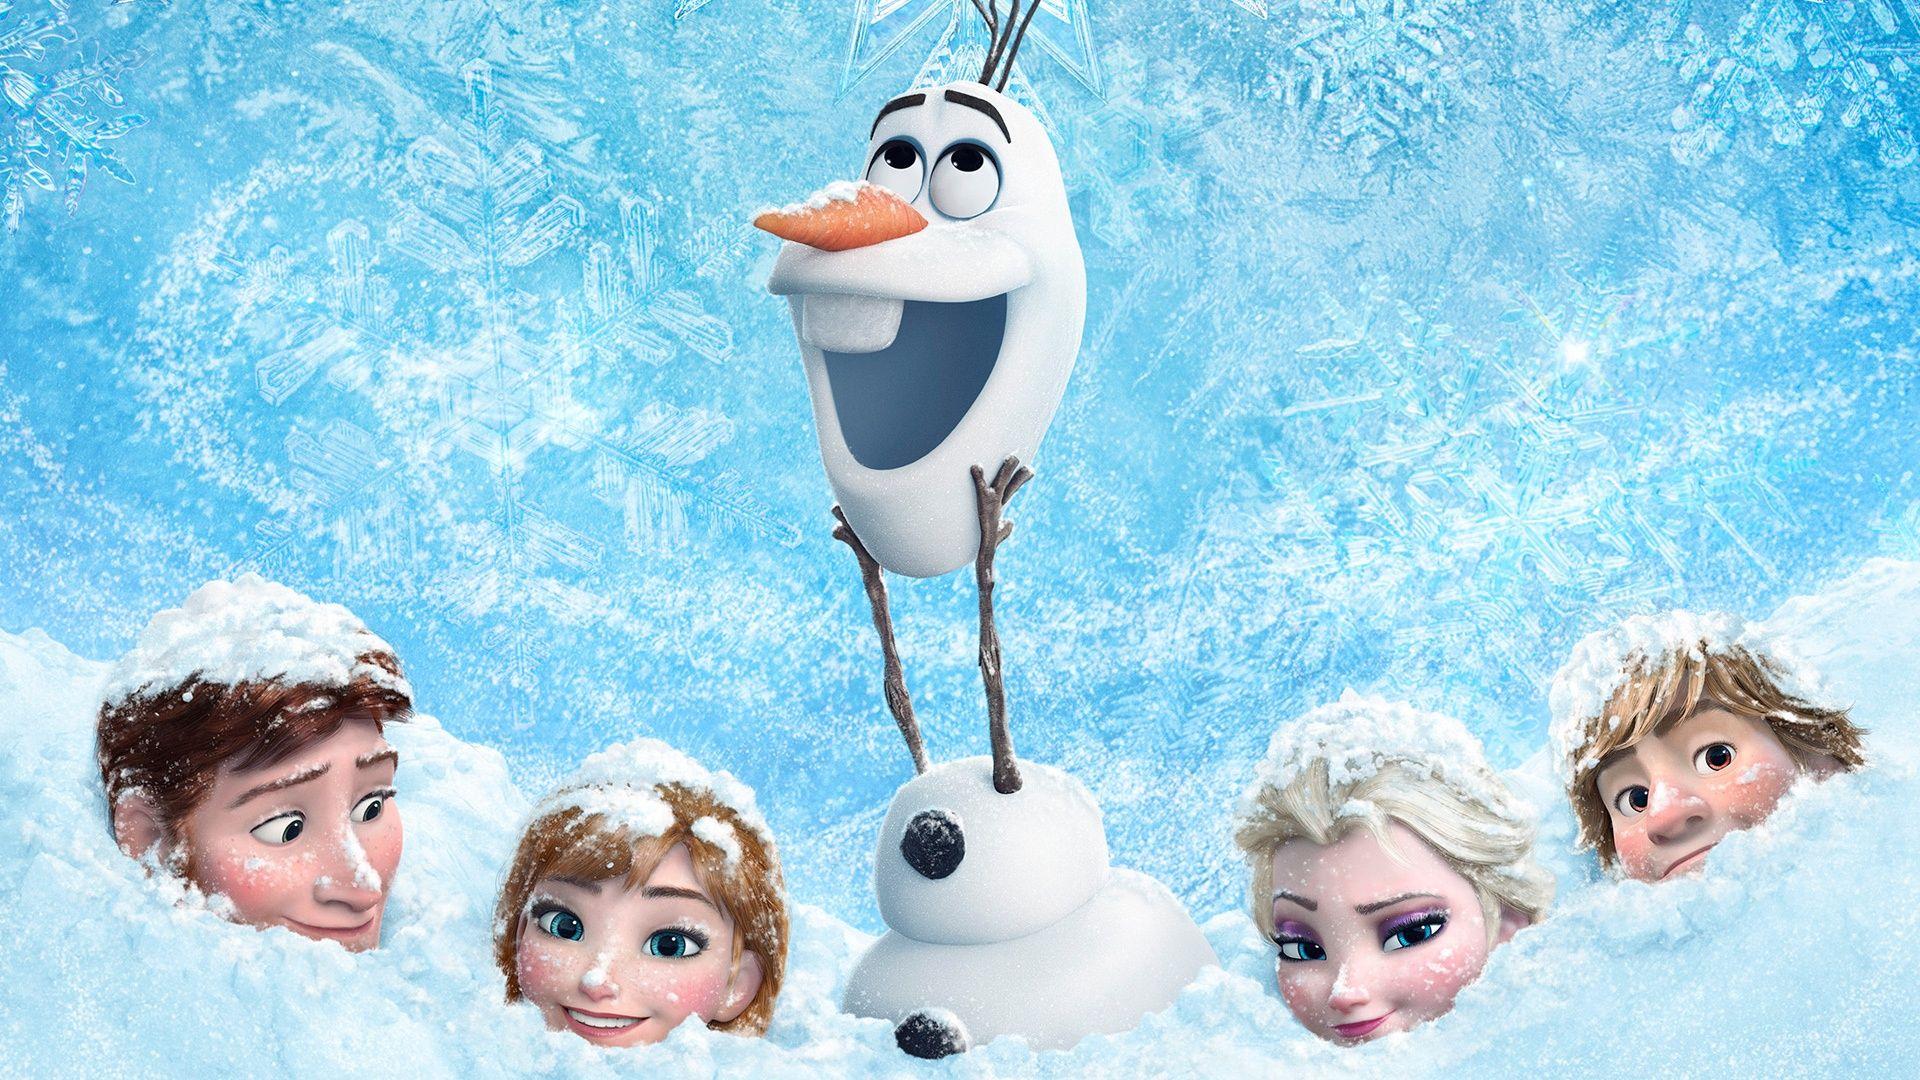 A New Frozen Movie? of Dad